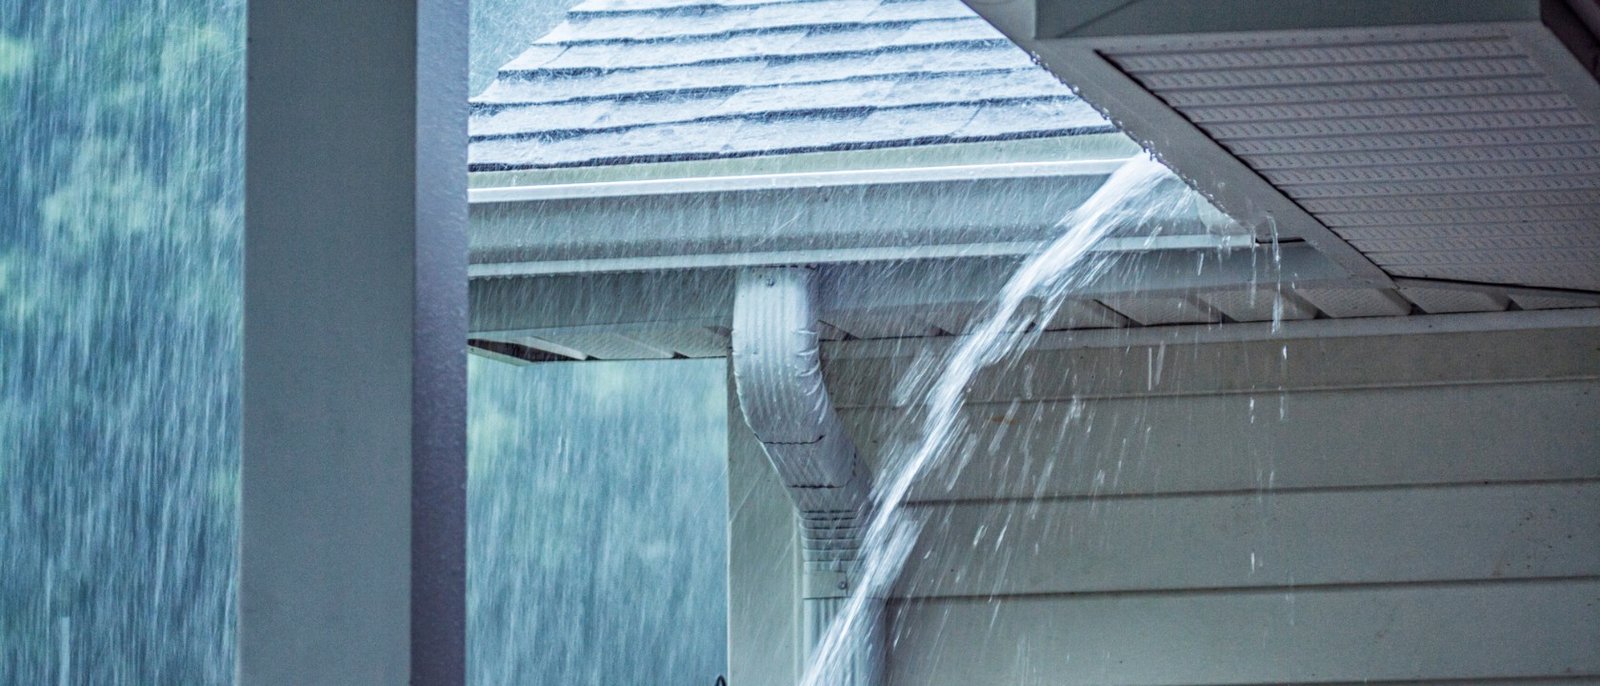 NEER-Step-by-Step Guide to Setting Up Your Own Rain Water Harvesting System